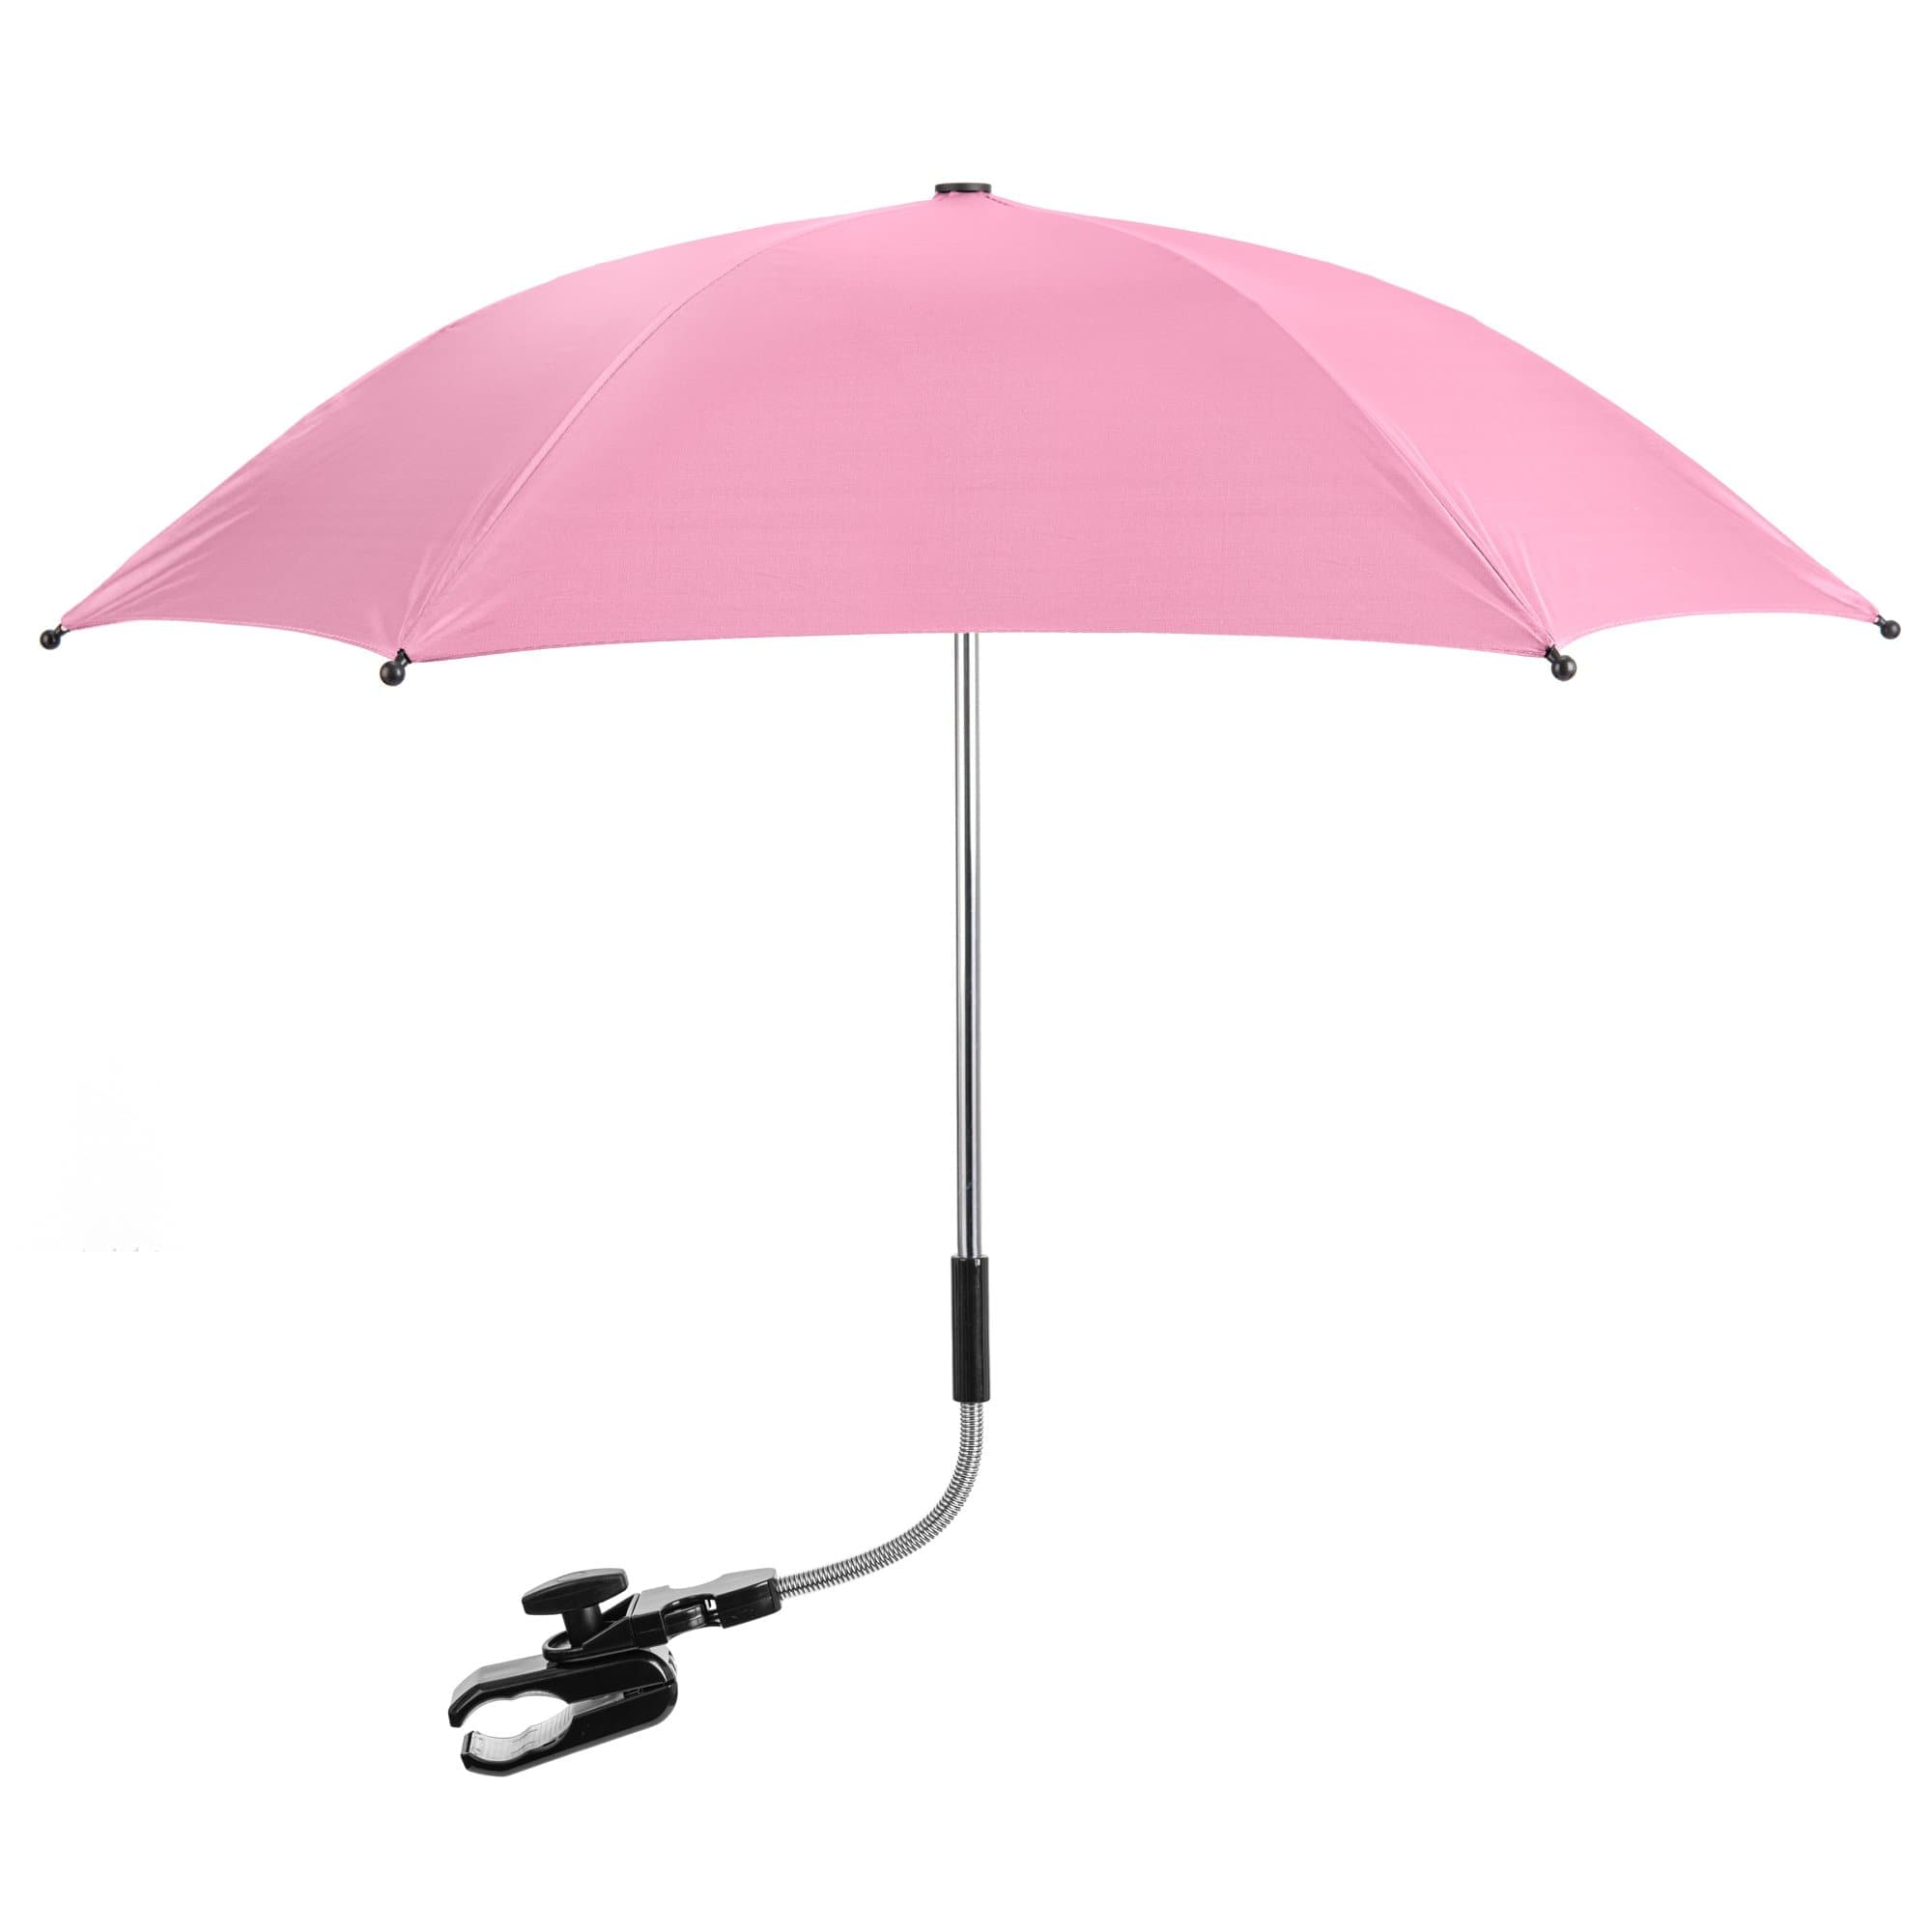 Universal Baby Parasol - Fits All Pushchairs / Prams / Strollers And Buggies - Fits All Models - Light Pink / Fits All Models | For Your Little One